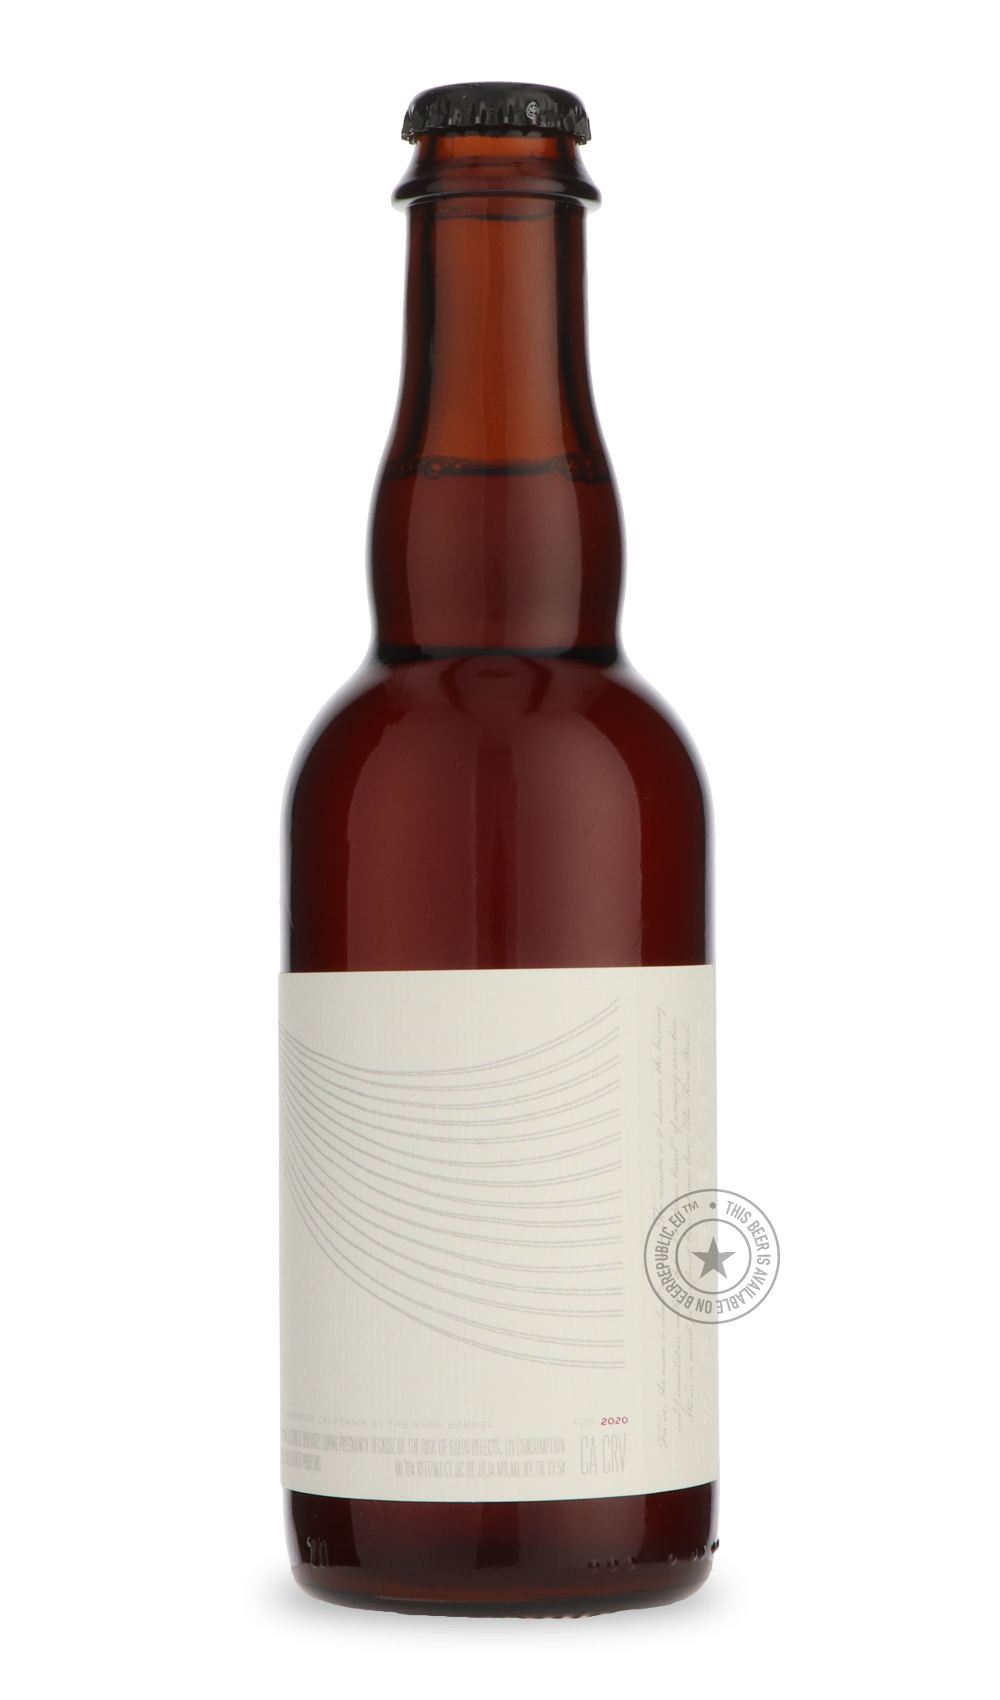 -The Rare Barrel- Ensnare the Senses 2020-Sour / Wild & Fruity- Only @ Beer Republic - The best online beer store for American & Canadian craft beer - Buy beer online from the USA and Canada - Bier online kopen - Amerikaans bier kopen - Craft beer store - Craft beer kopen - Amerikanisch bier kaufen - Bier online kaufen - Acheter biere online - IPA - Stout - Porter - New England IPA - Hazy IPA - Imperial Stout - Barrel Aged - Barrel Aged Imperial Stout - Brown - Dark beer - Blond - Blonde - Pilsner - Lager -